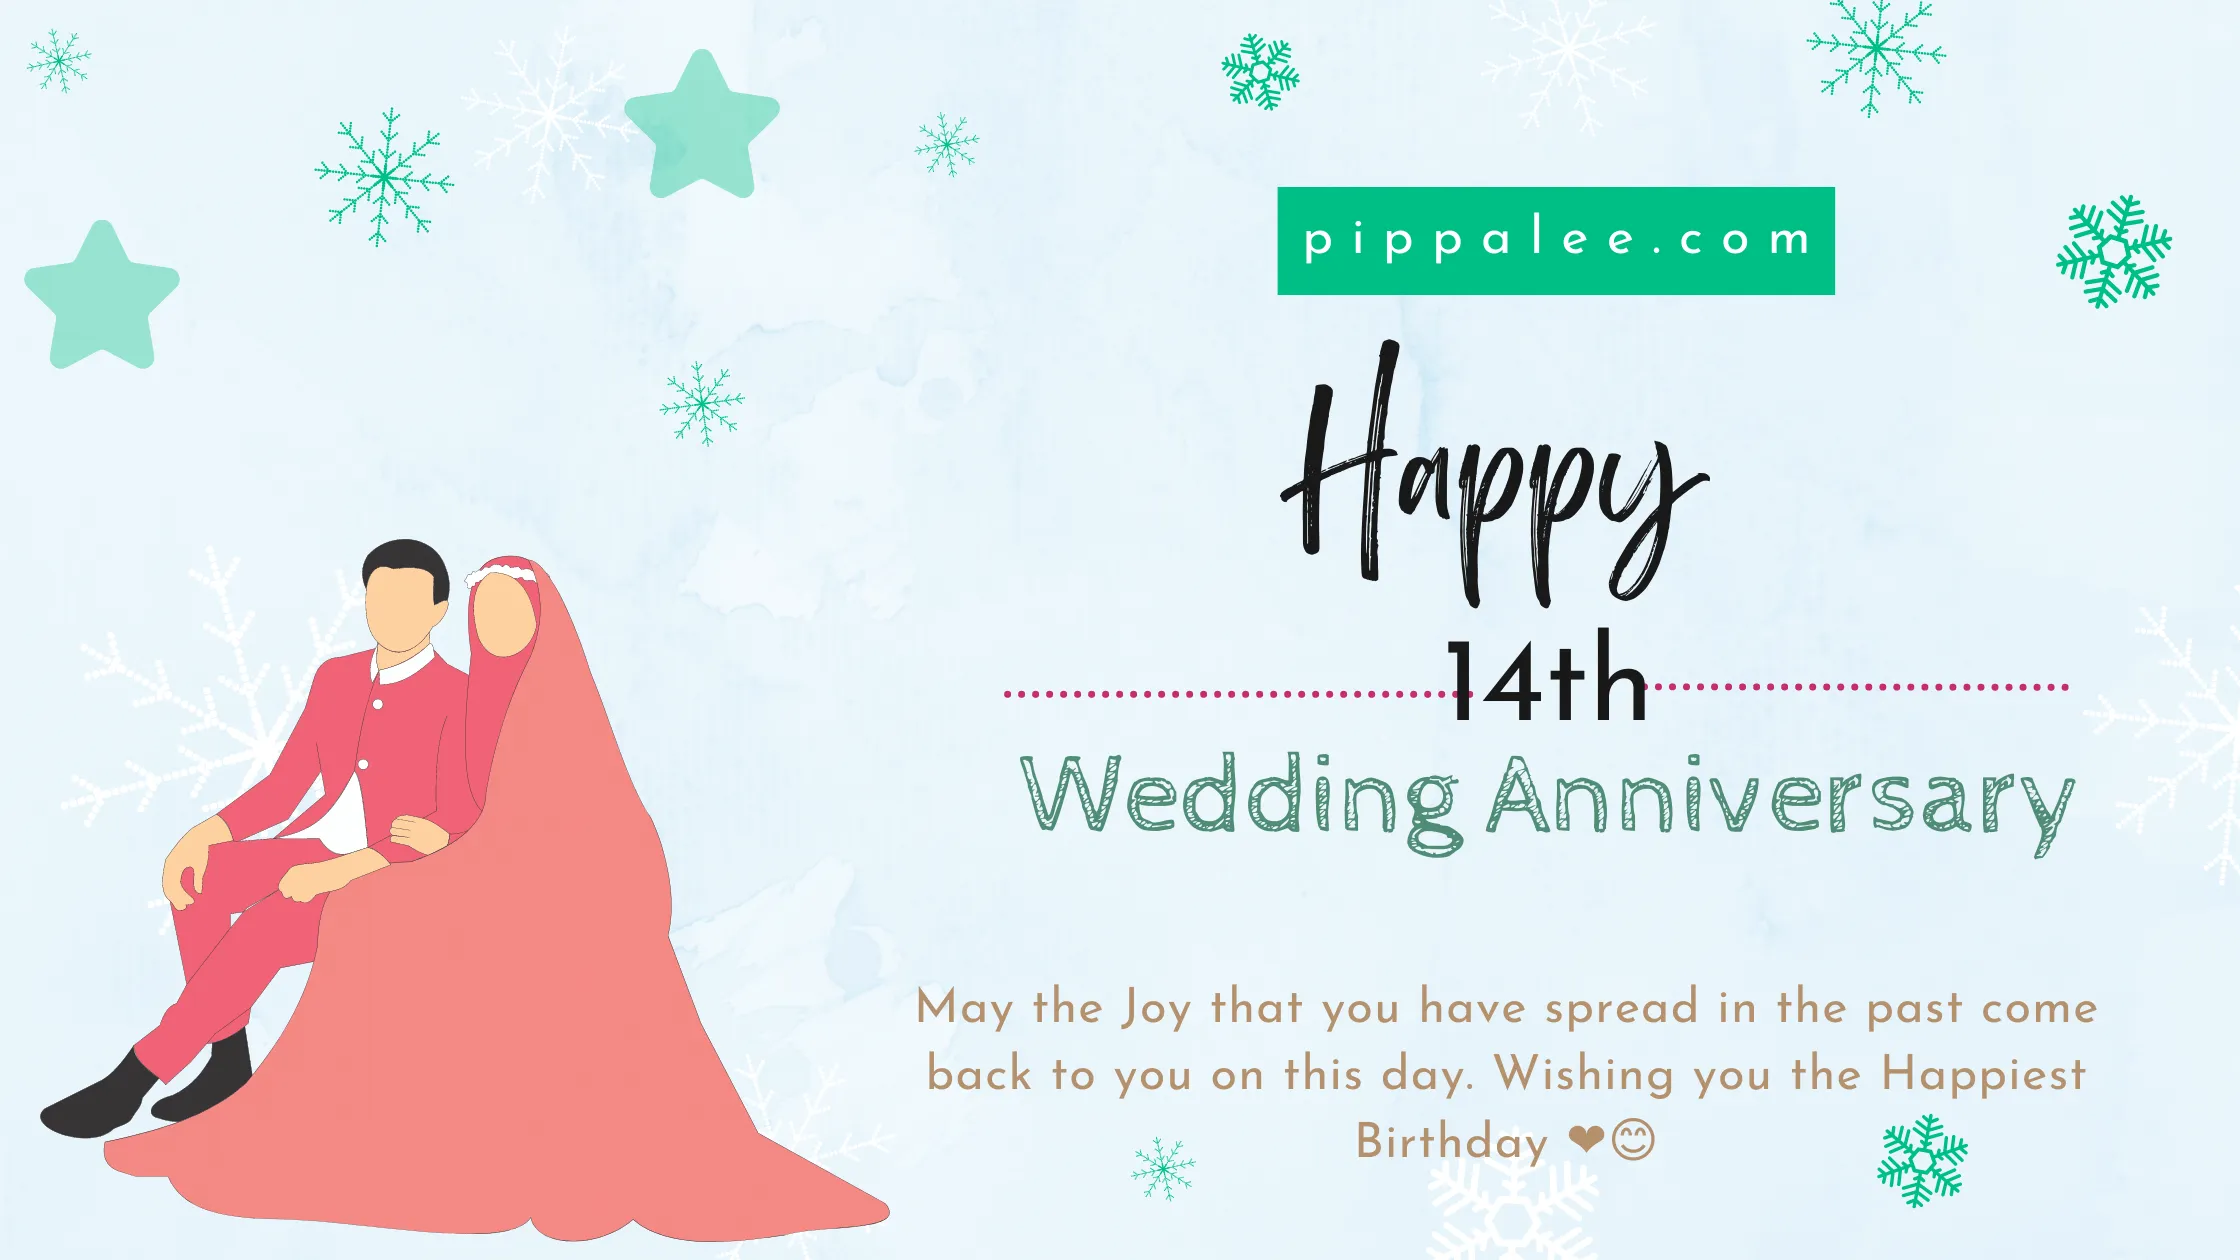 14th Wedding Anniversary - Wishes & Messages